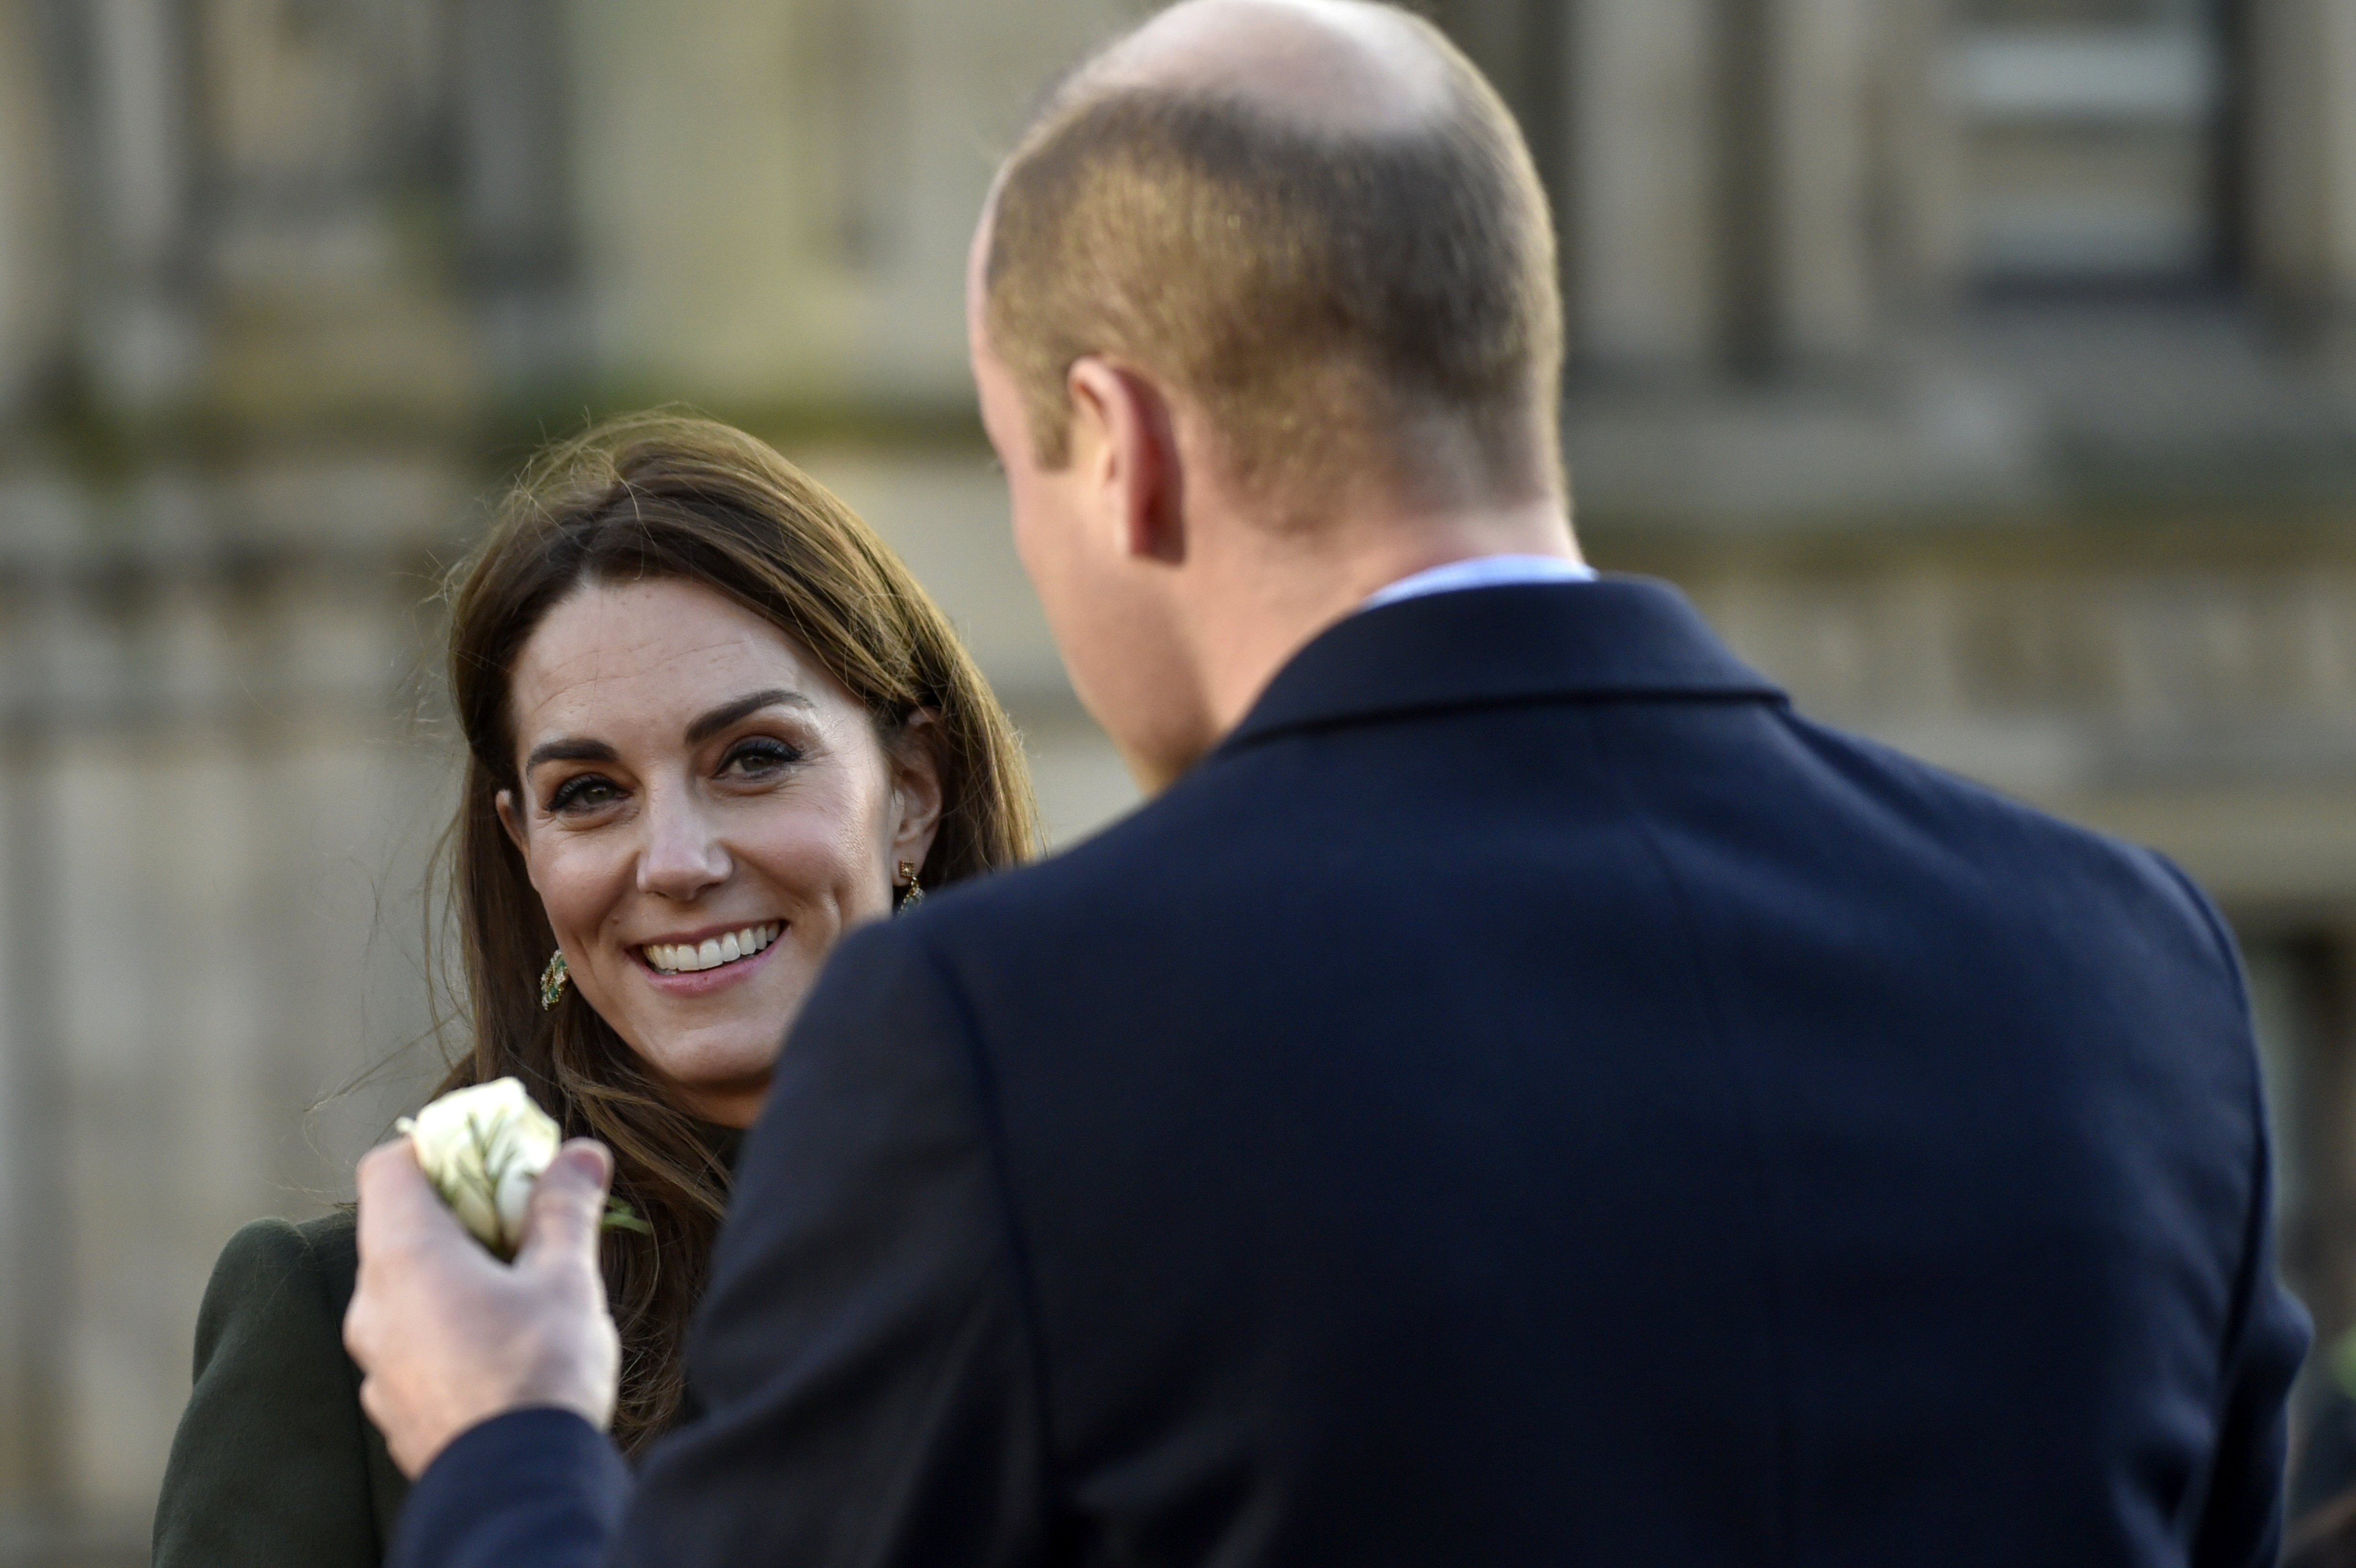 Kate Duchess of Cambridge smiles as Britain's Prince William holds a rose during their meeting with the members of the public at Centenary Square in Bradford northern England, Wednesday, Jan. 15, 2020. (AP Photo/Rui Vieira)